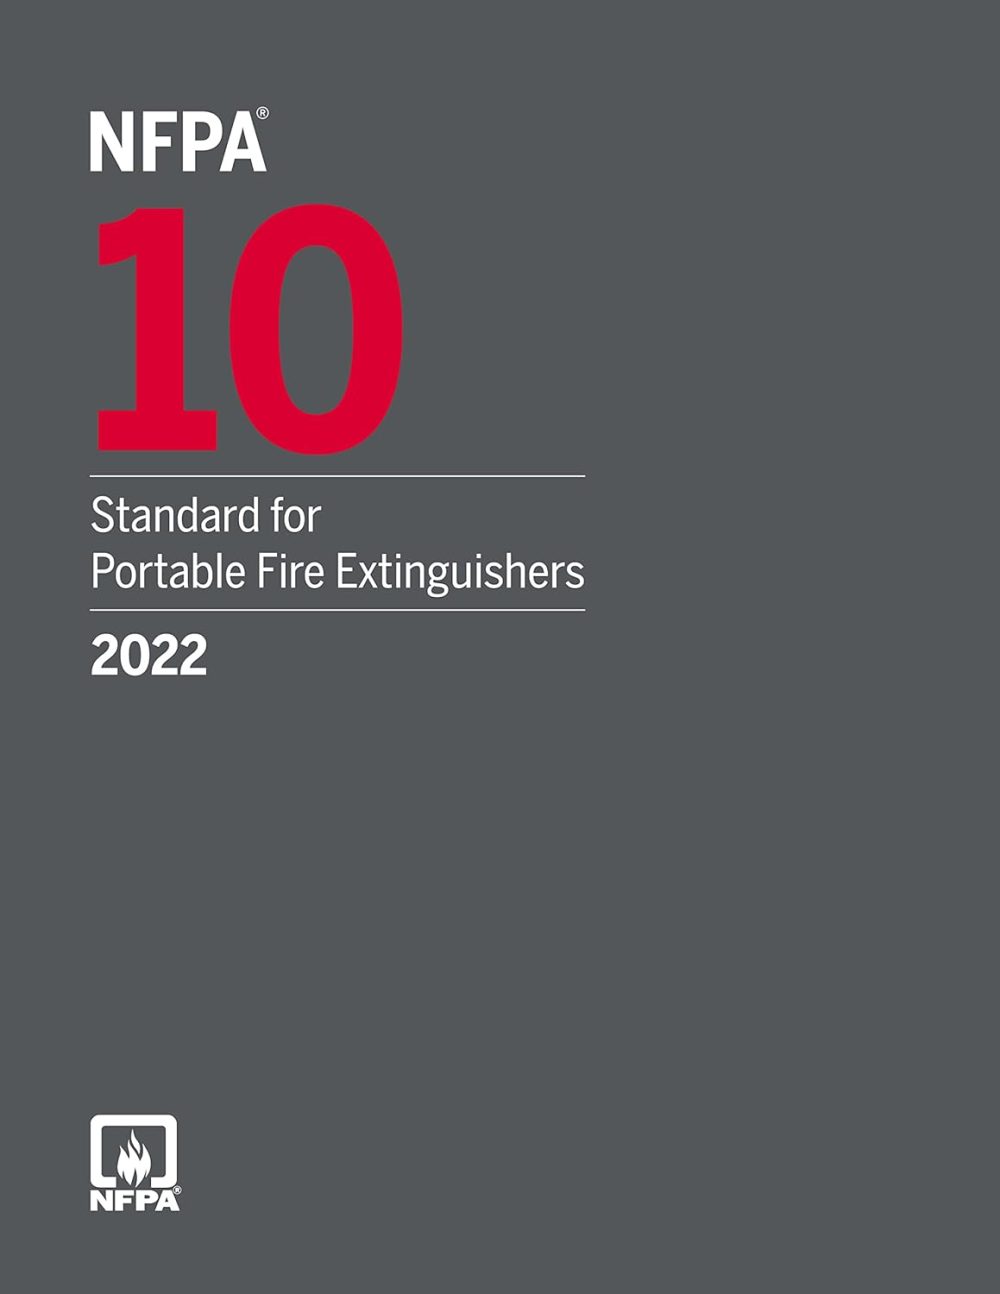 NFPA 10, Standard for Portable Fire Extinguishers, 2022 Edition